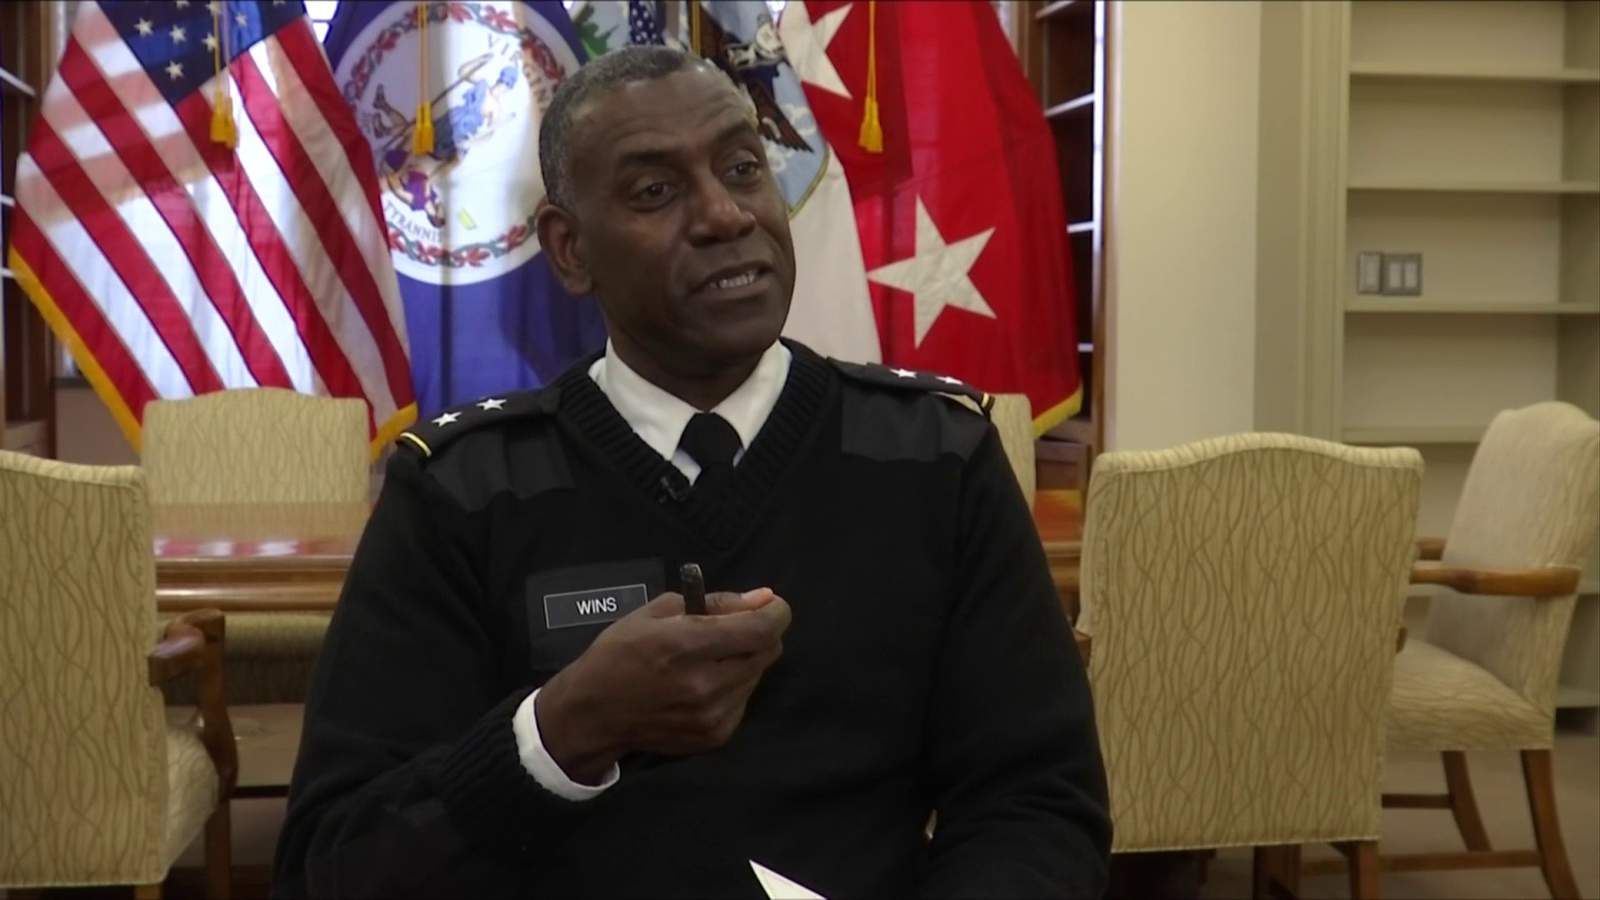 New VMI superintendent begins tenure following allegations of racism at the school